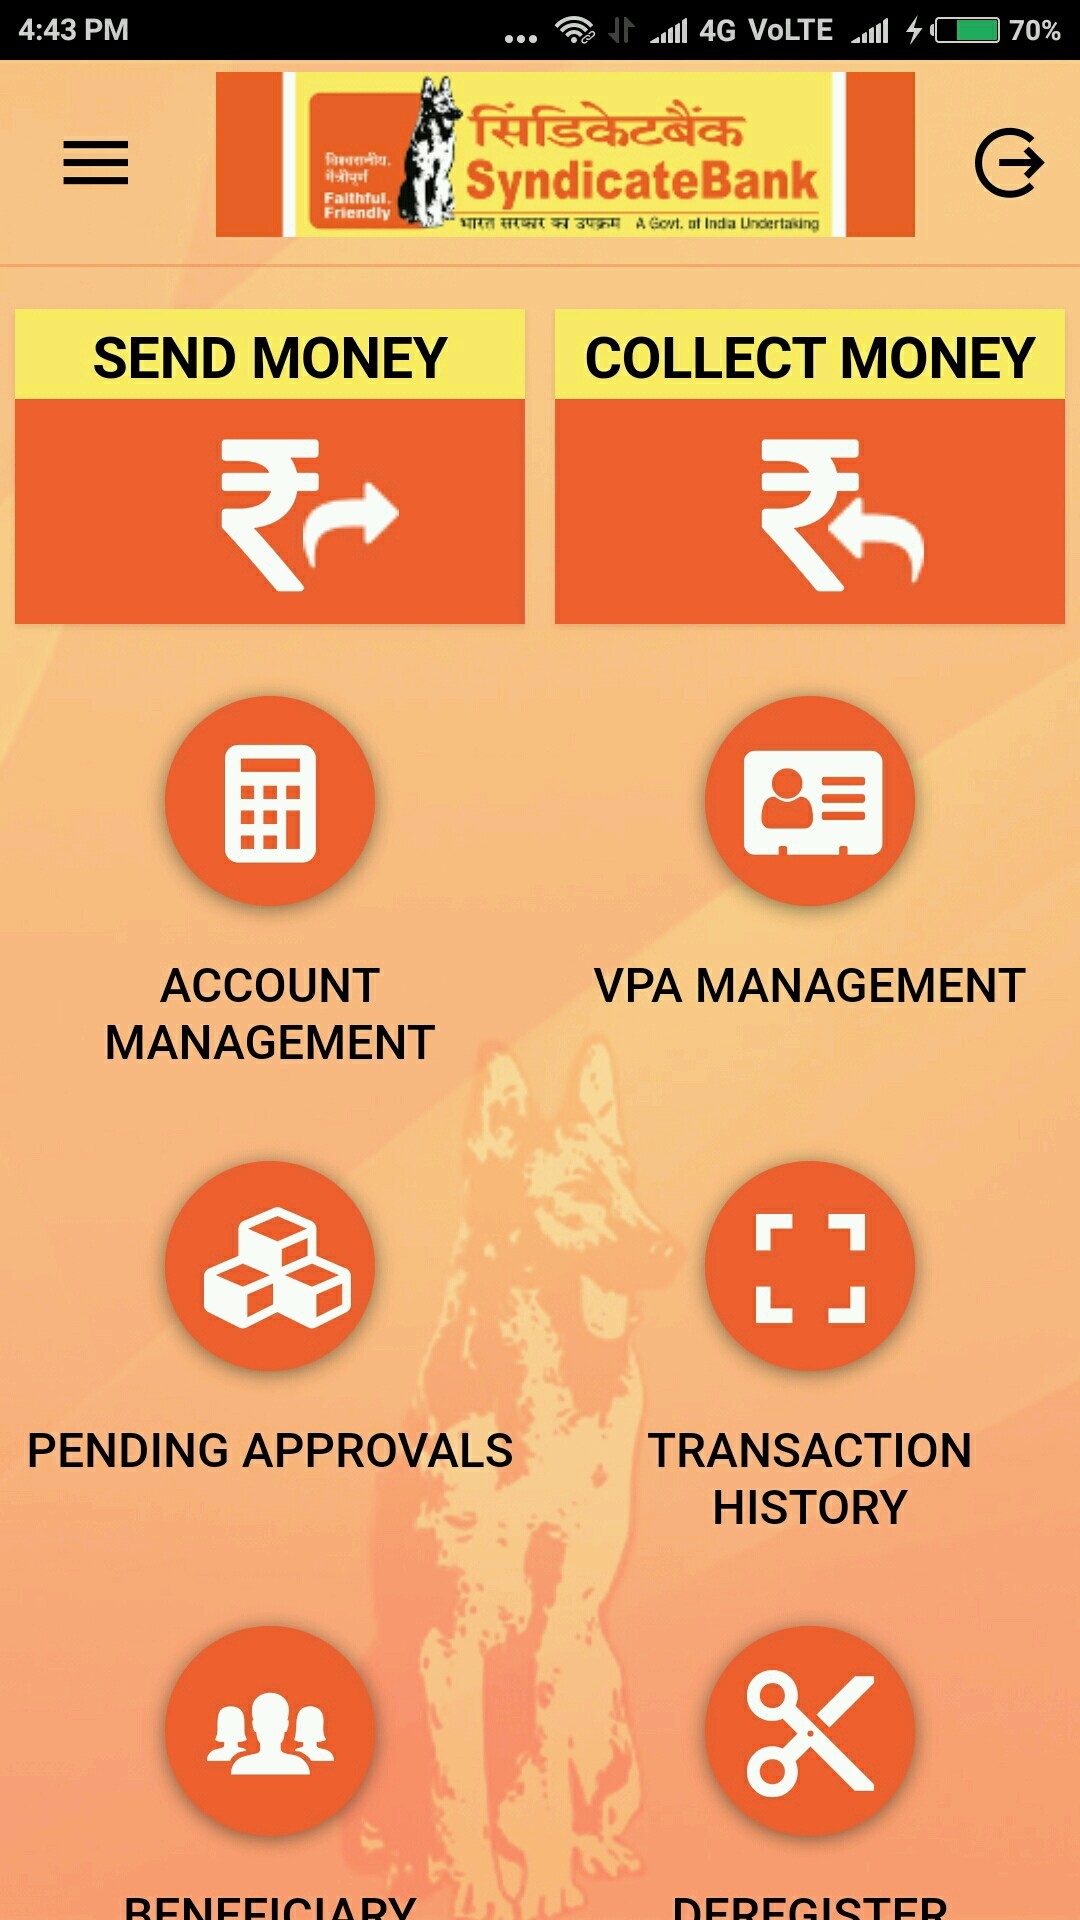 How To Install Syndicate Bank Synd UPI Mobile Application ?